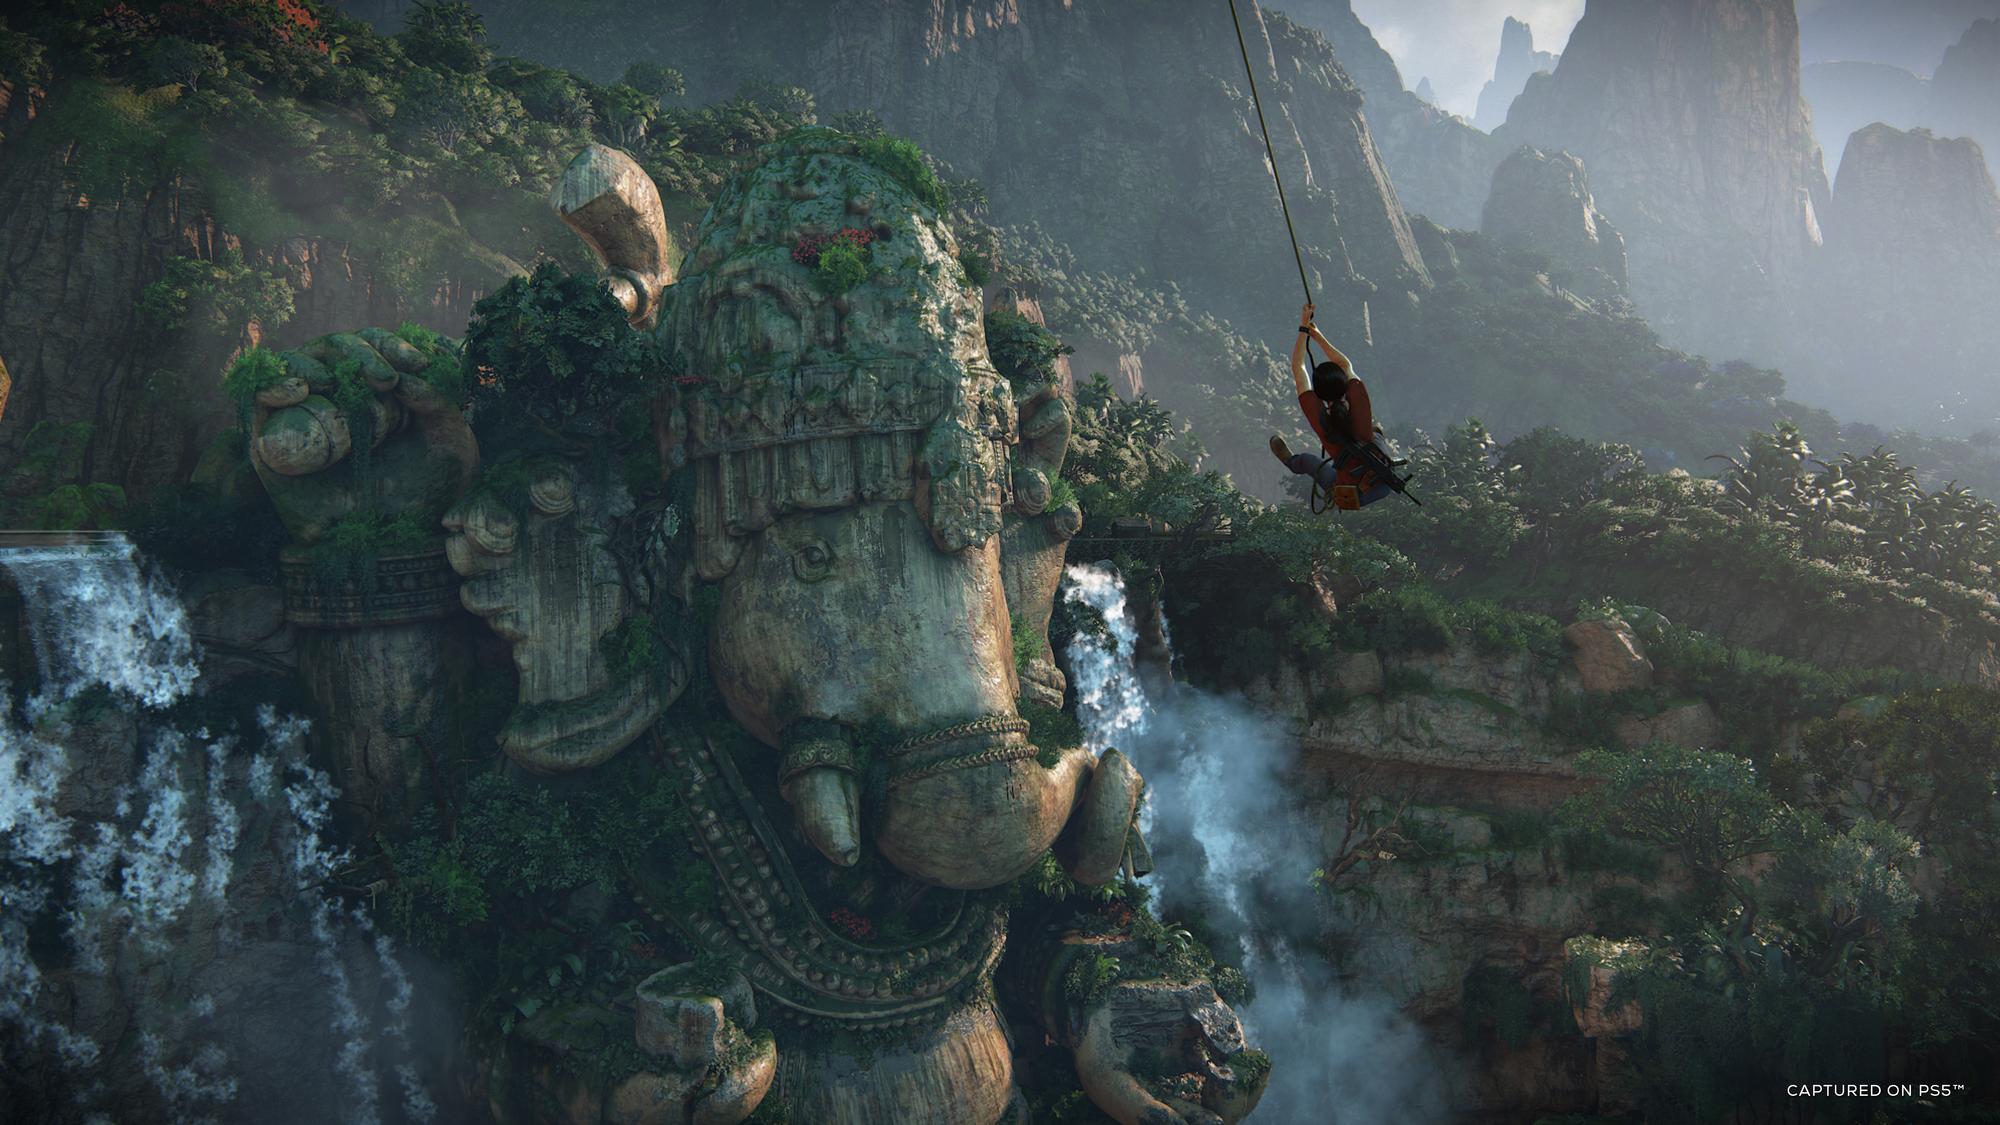 Obrázok z hry Uncharted: Legacy of Thieves Collection.